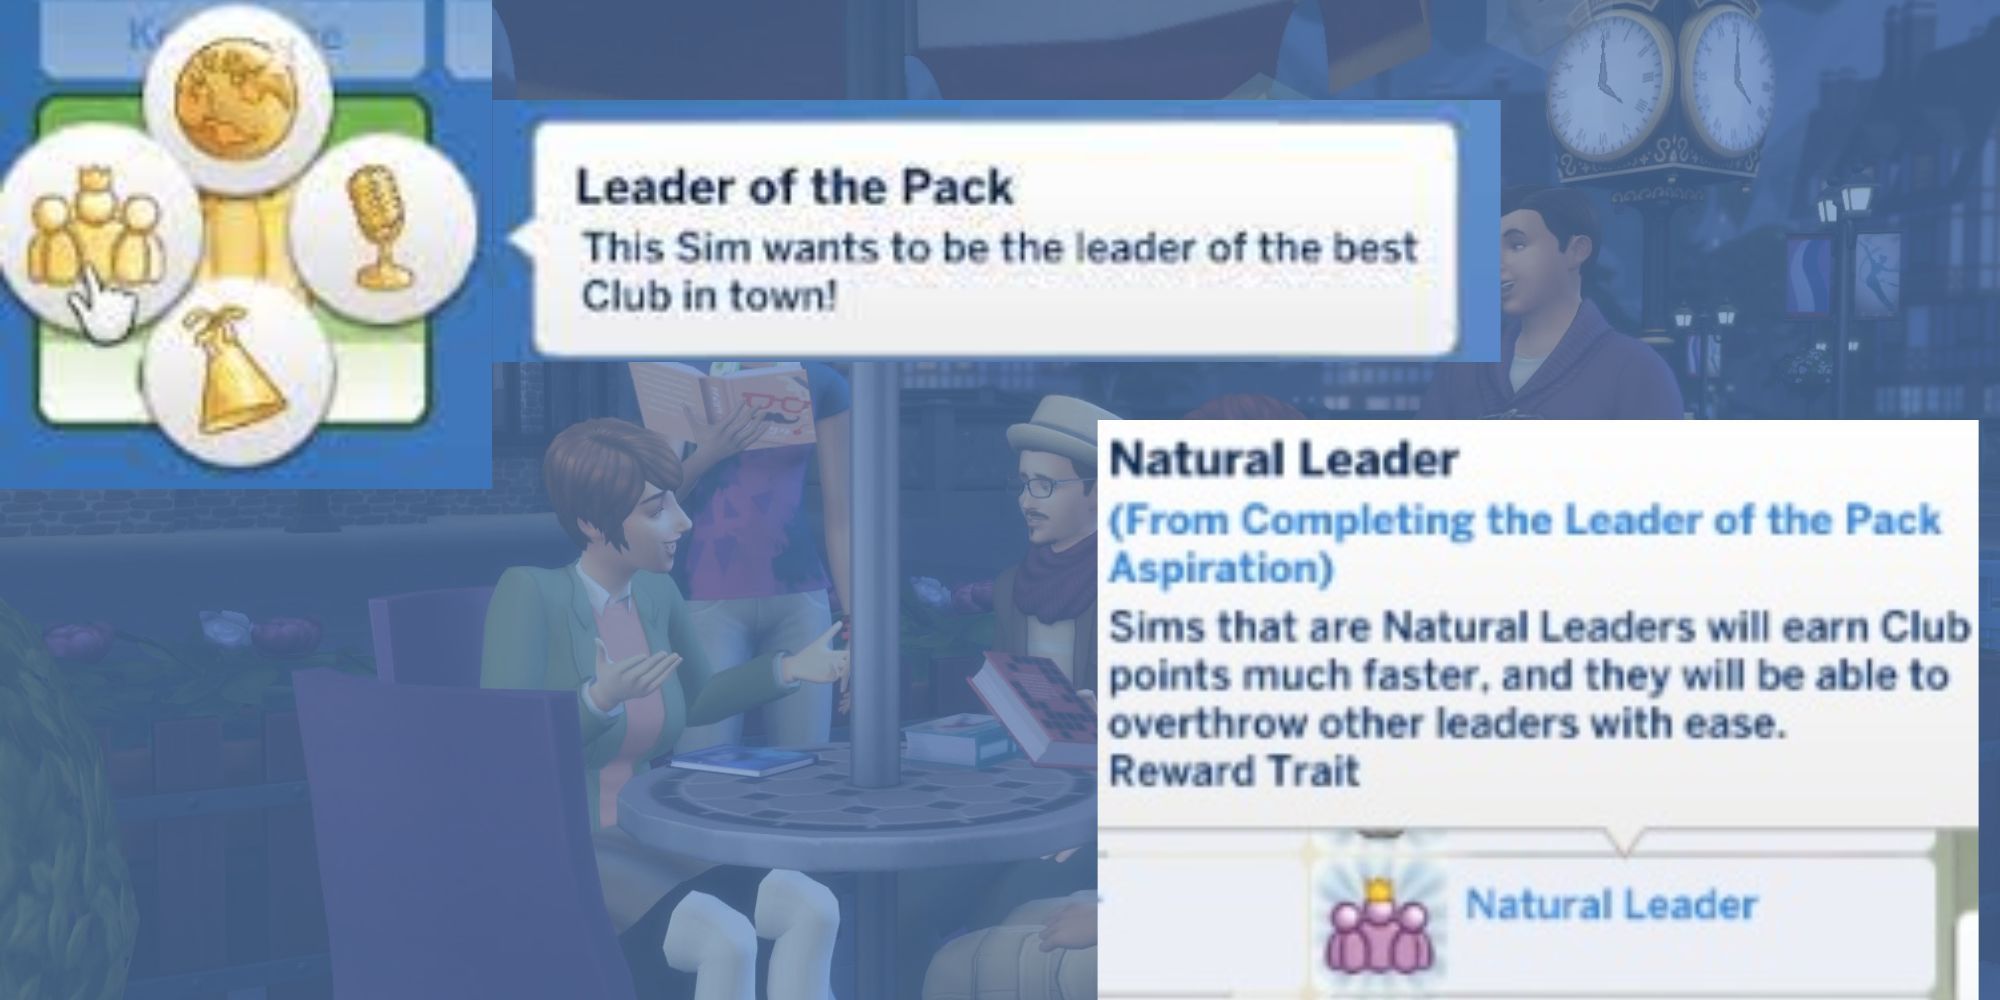 The Sims 4 Leader of the Pack Aspiration